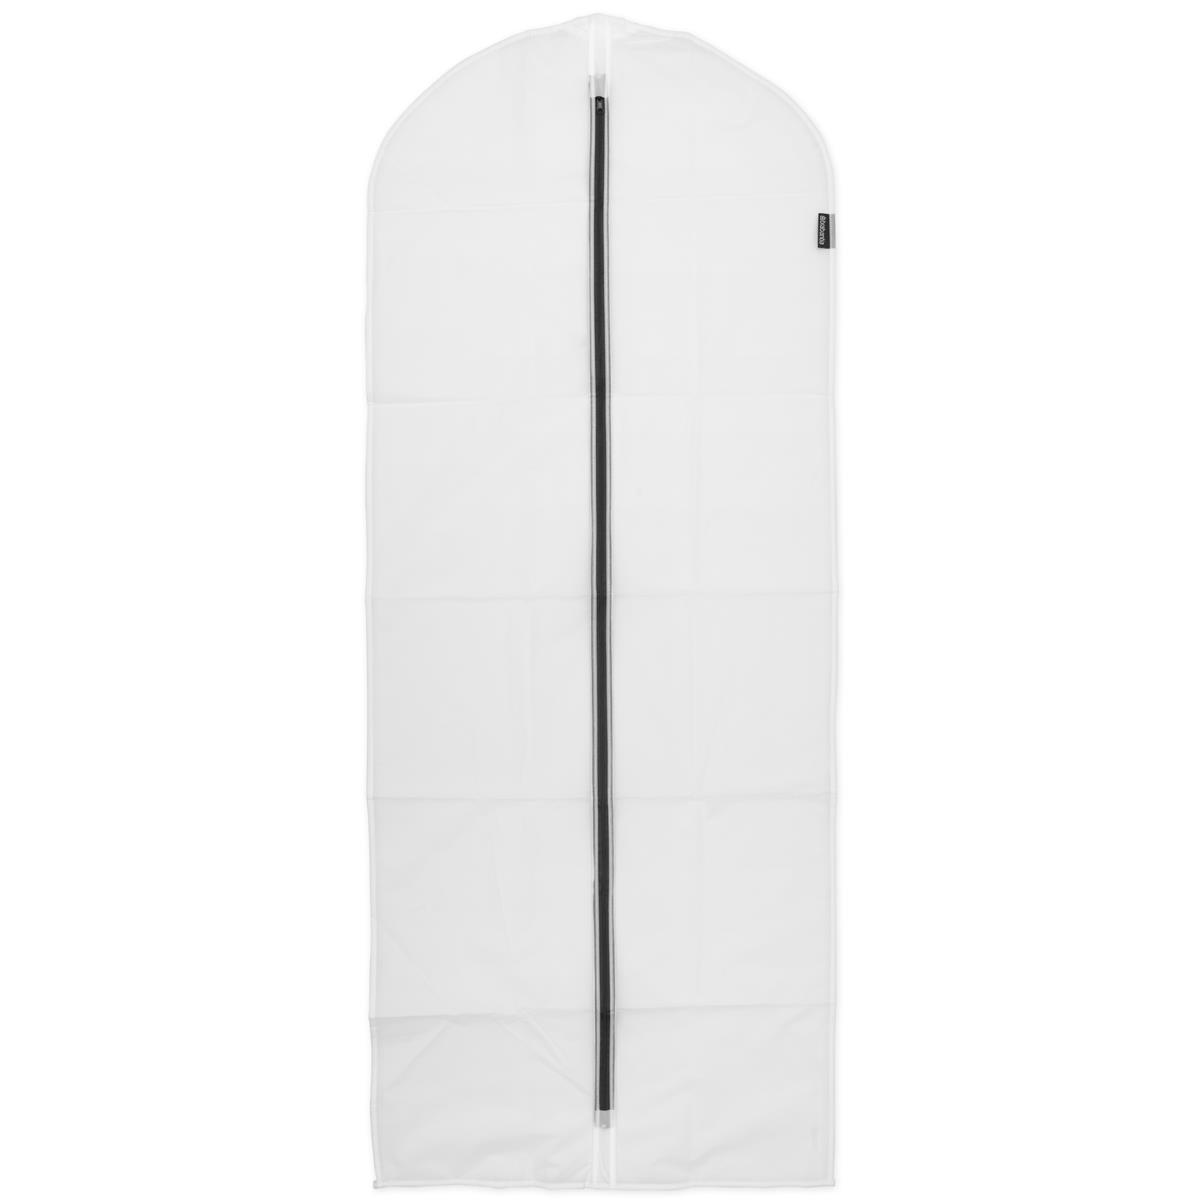 What is the length of these Brabantia garment bags?